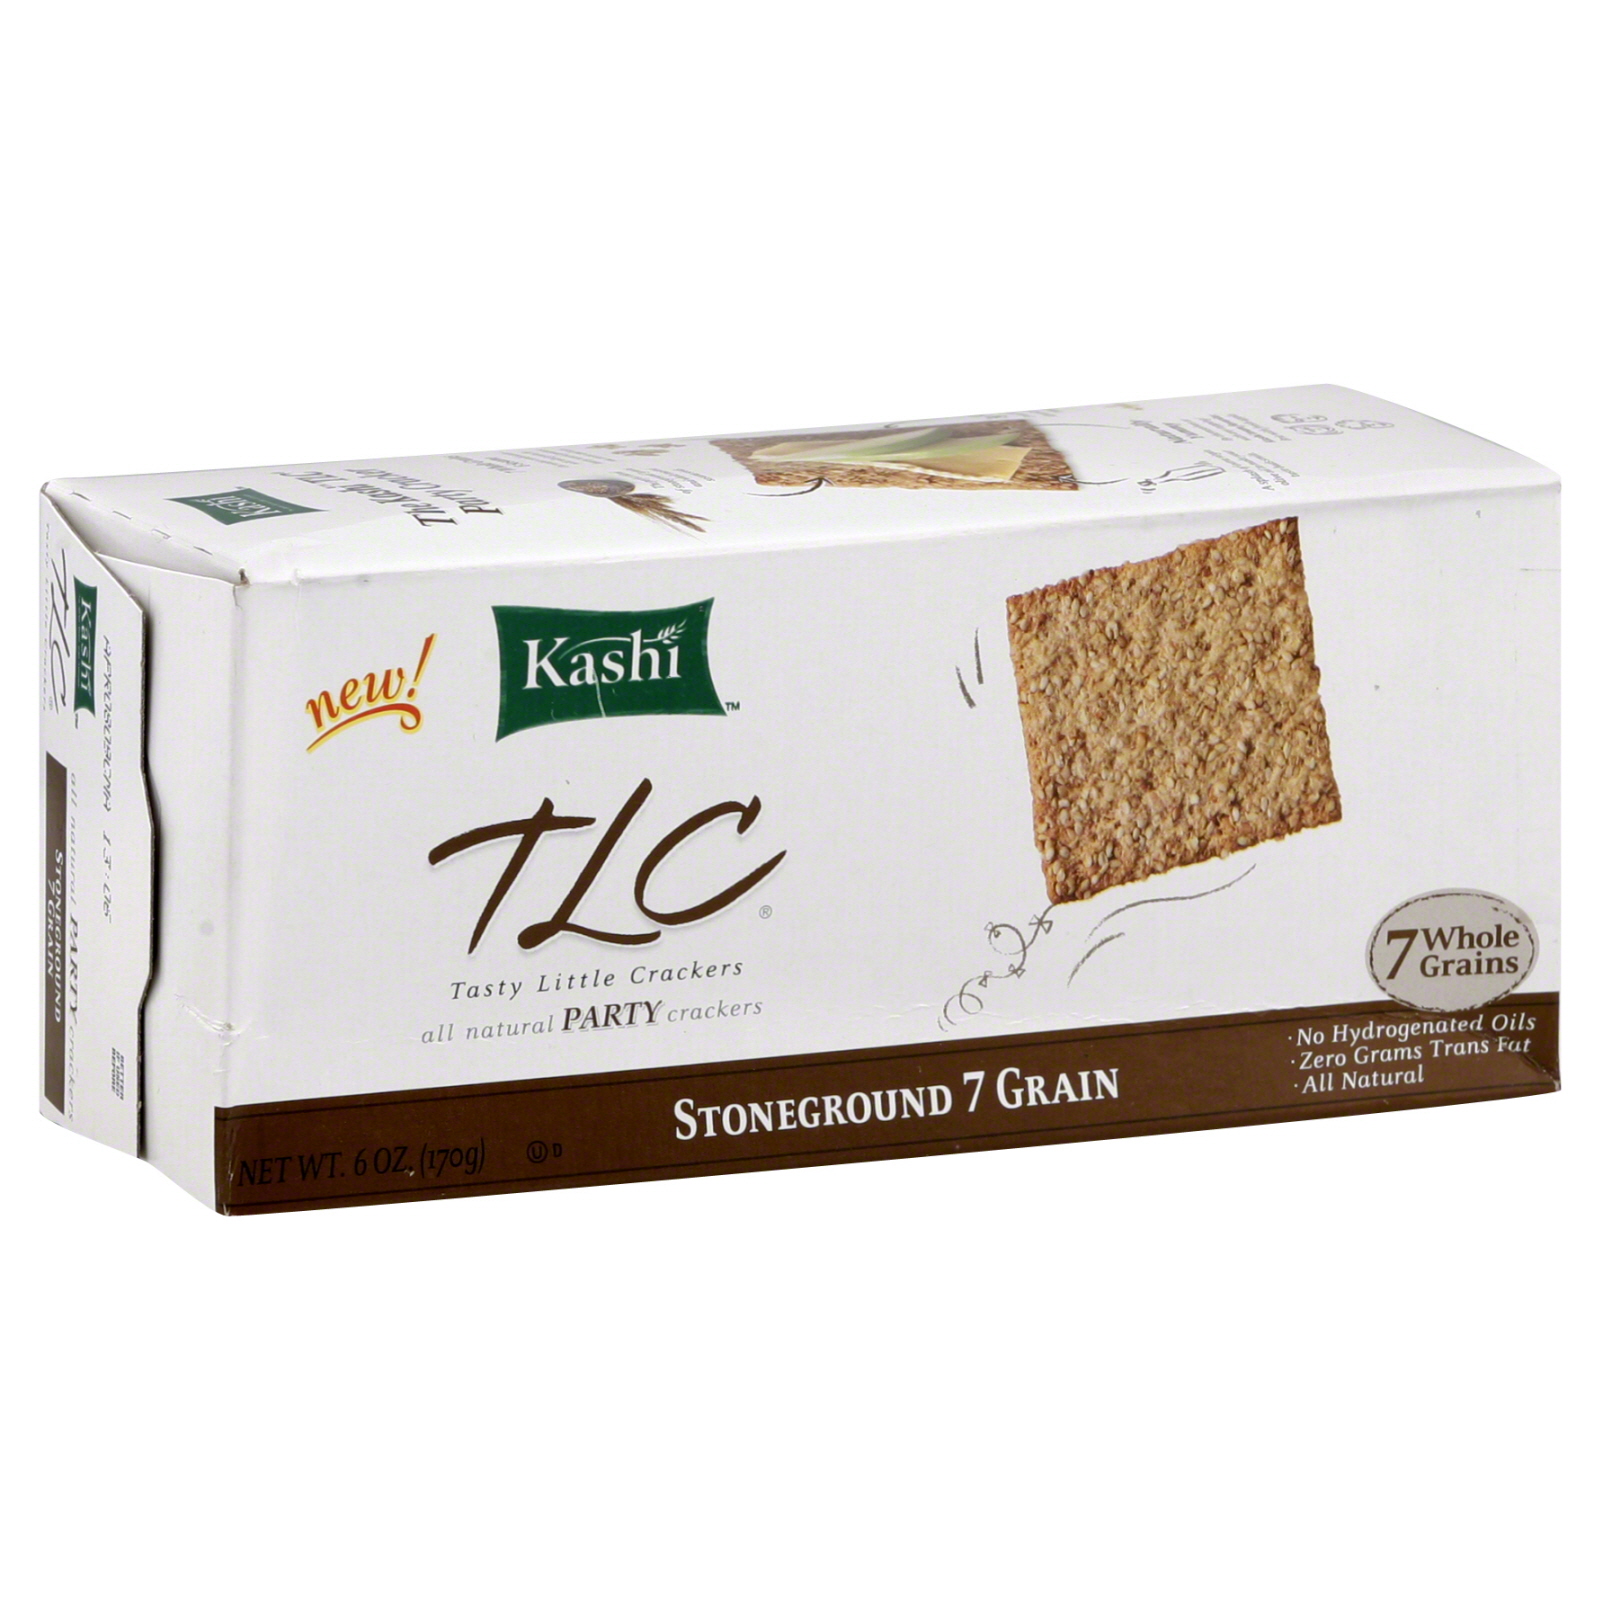 Kashi TLC Party Crackers, All Natural, Stoneground 7 Grain, 6 oz (170 g)